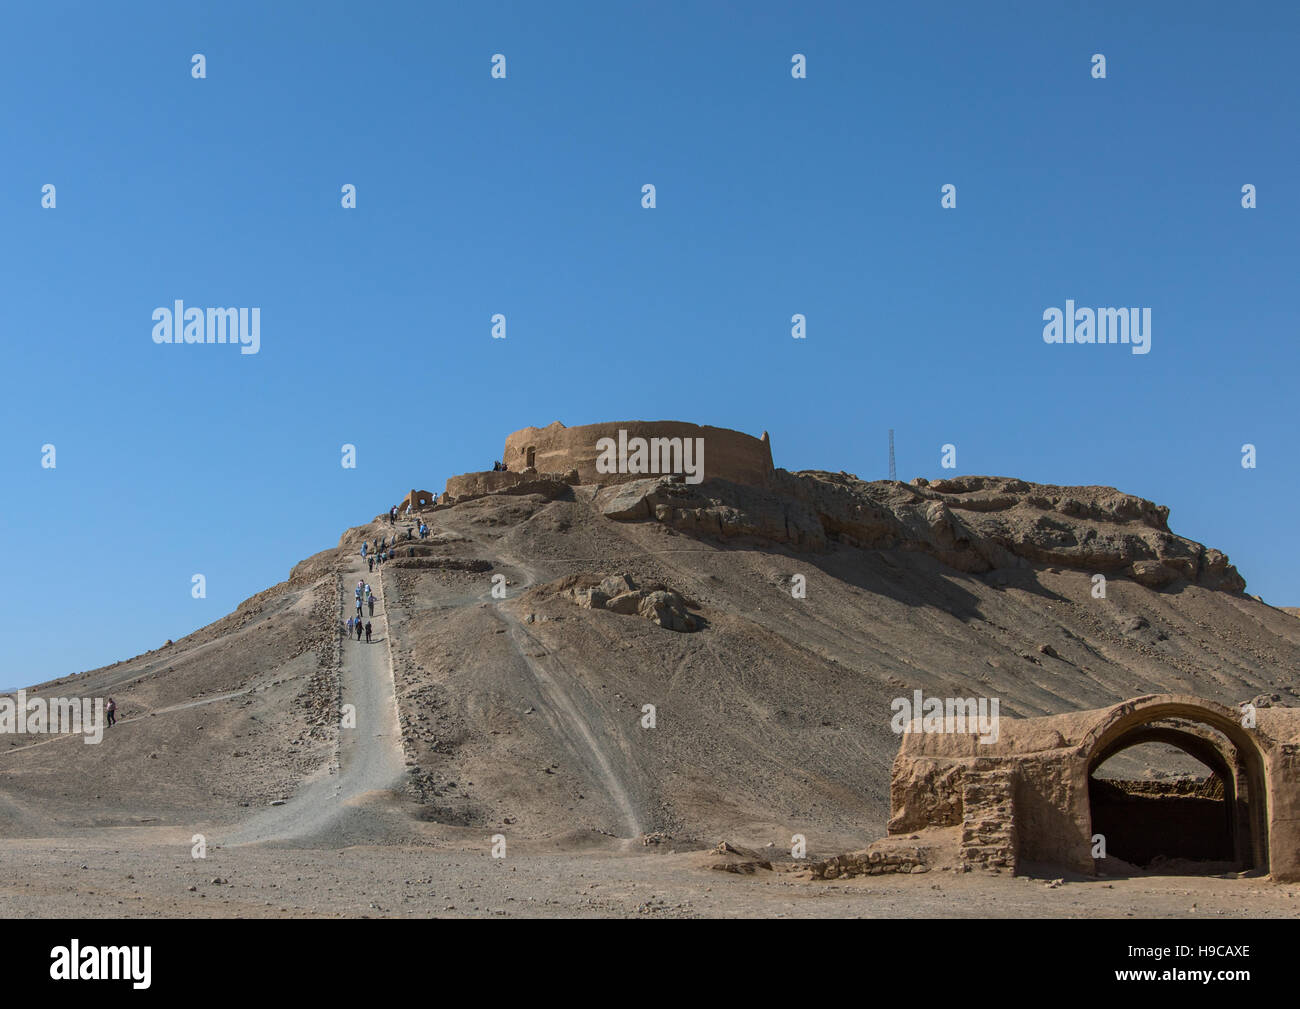 Tower of silence where zoroastrians brought their deads and vultures would consume the corpses, Yazd province, Yazd, Iran Stock Photo